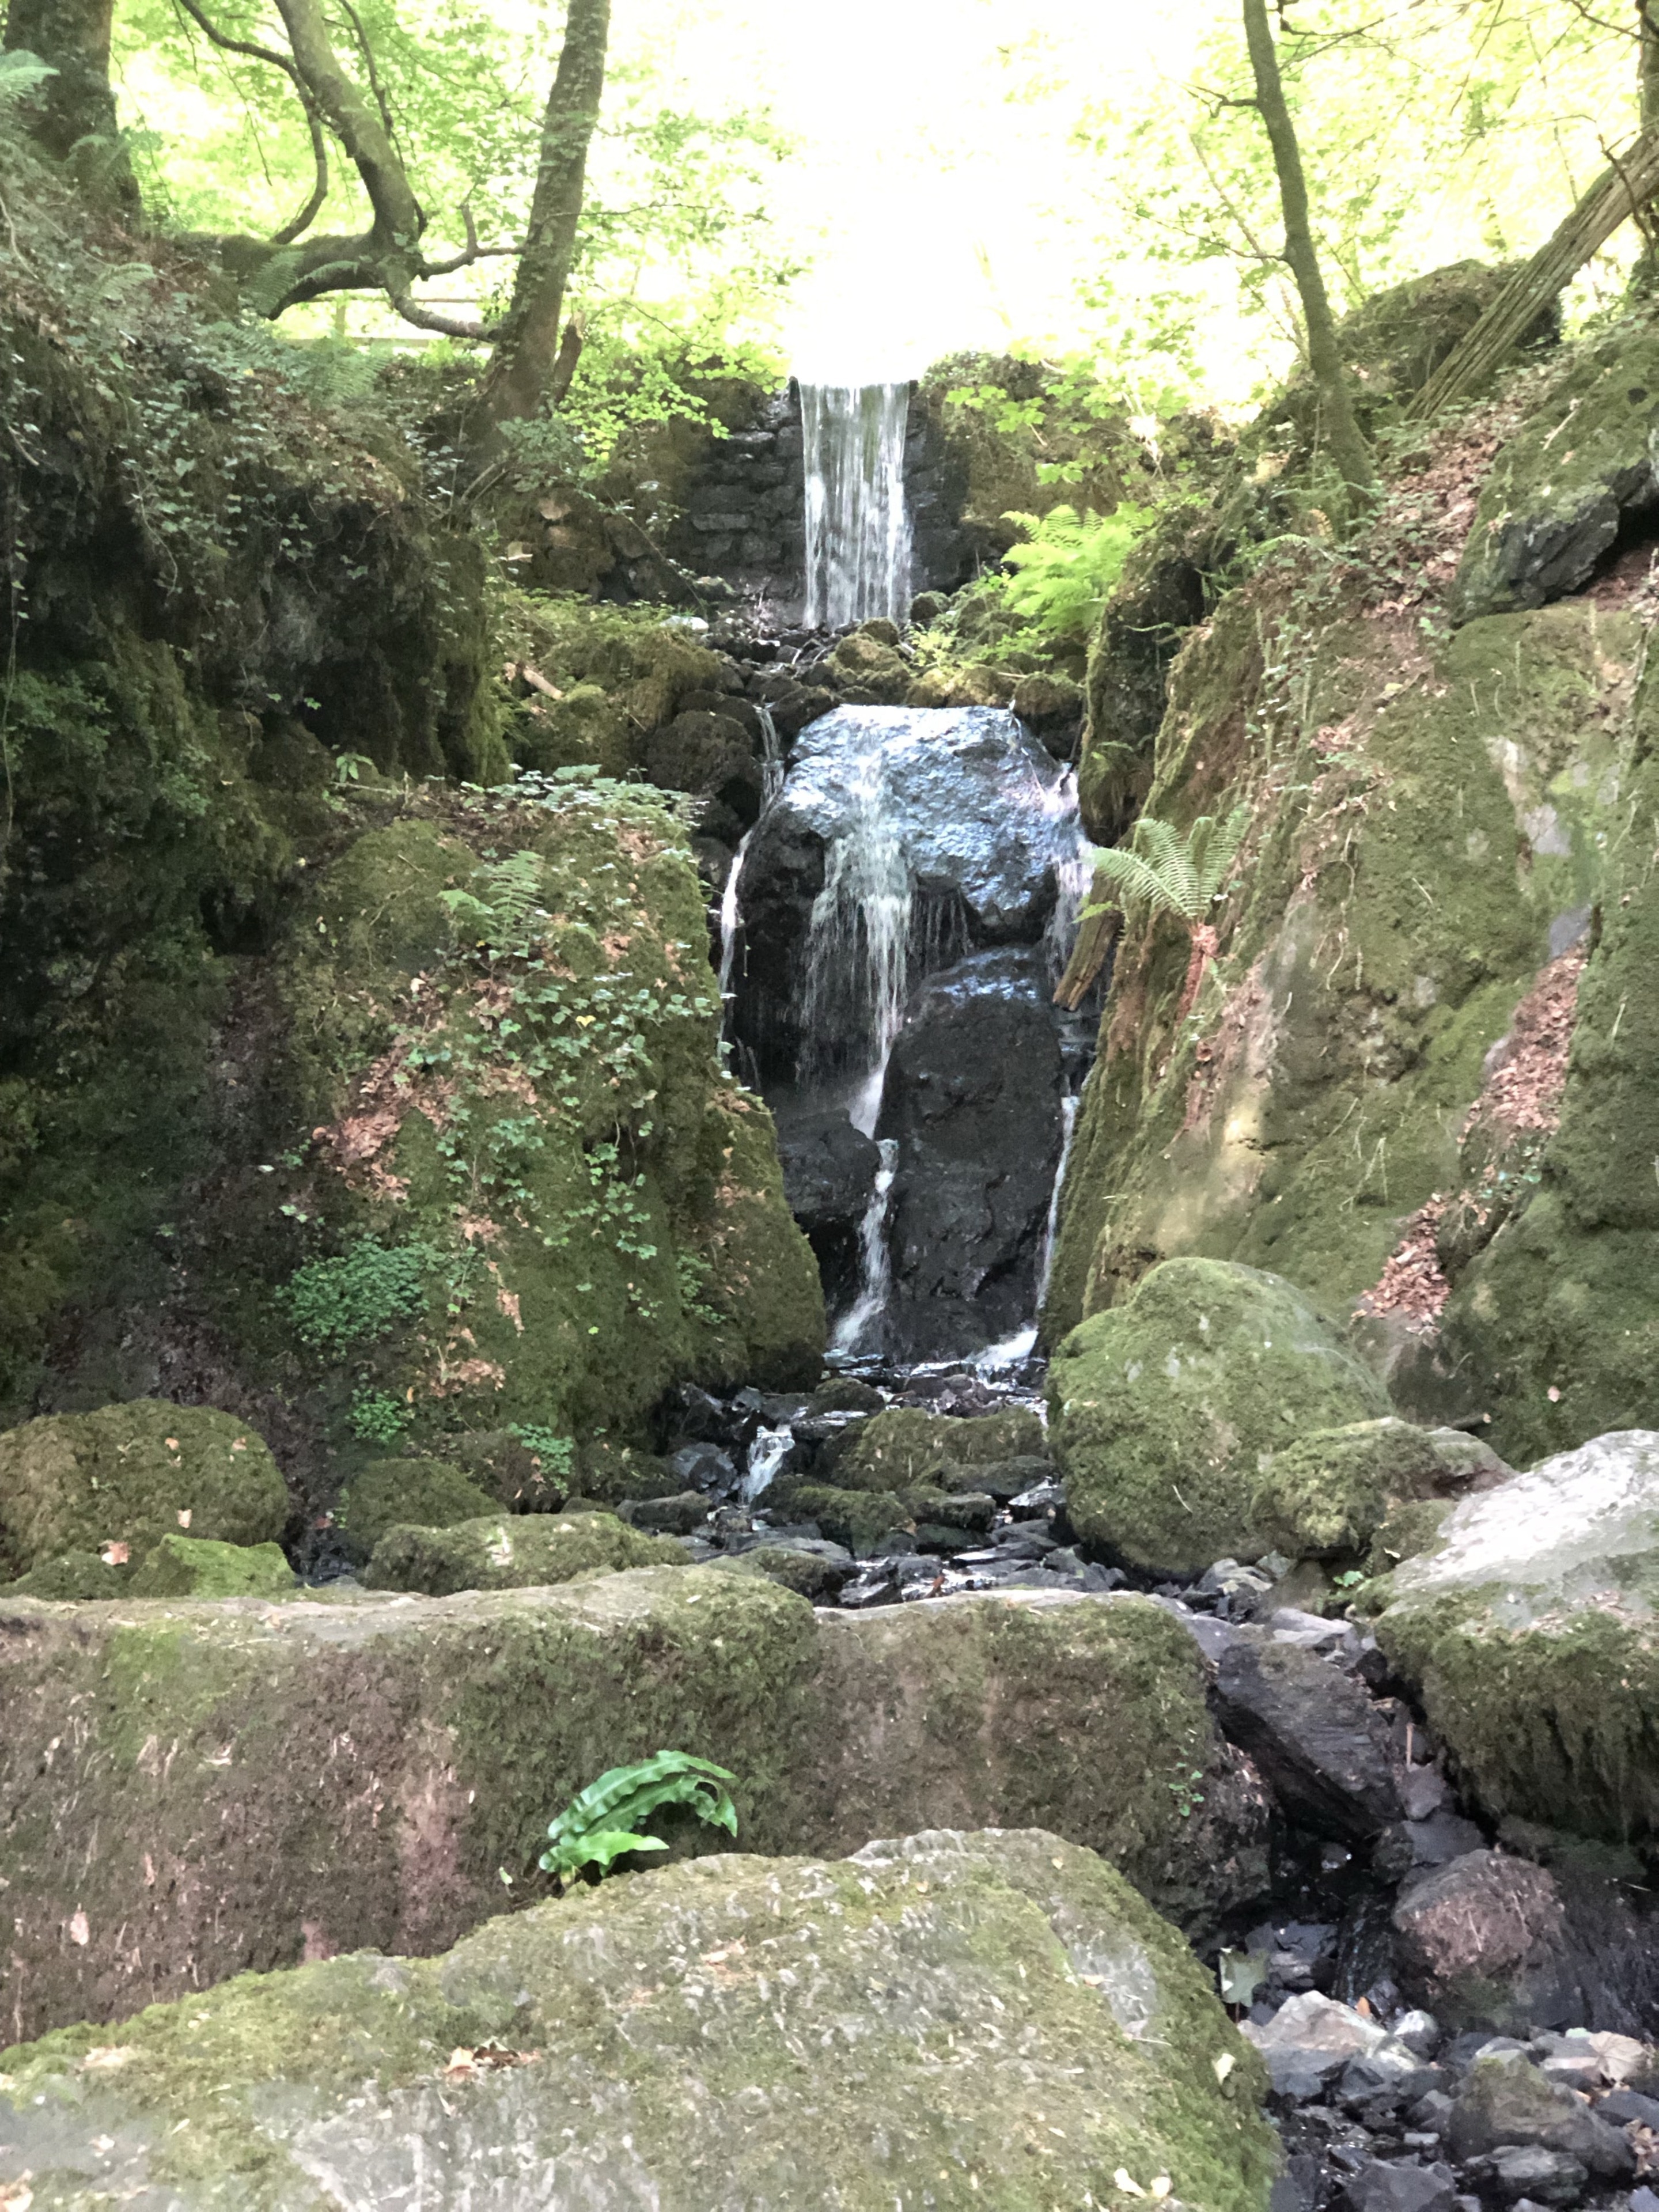 Canonteign Falls- a must visit to this beautiful place.
#exploreEngland
#nature